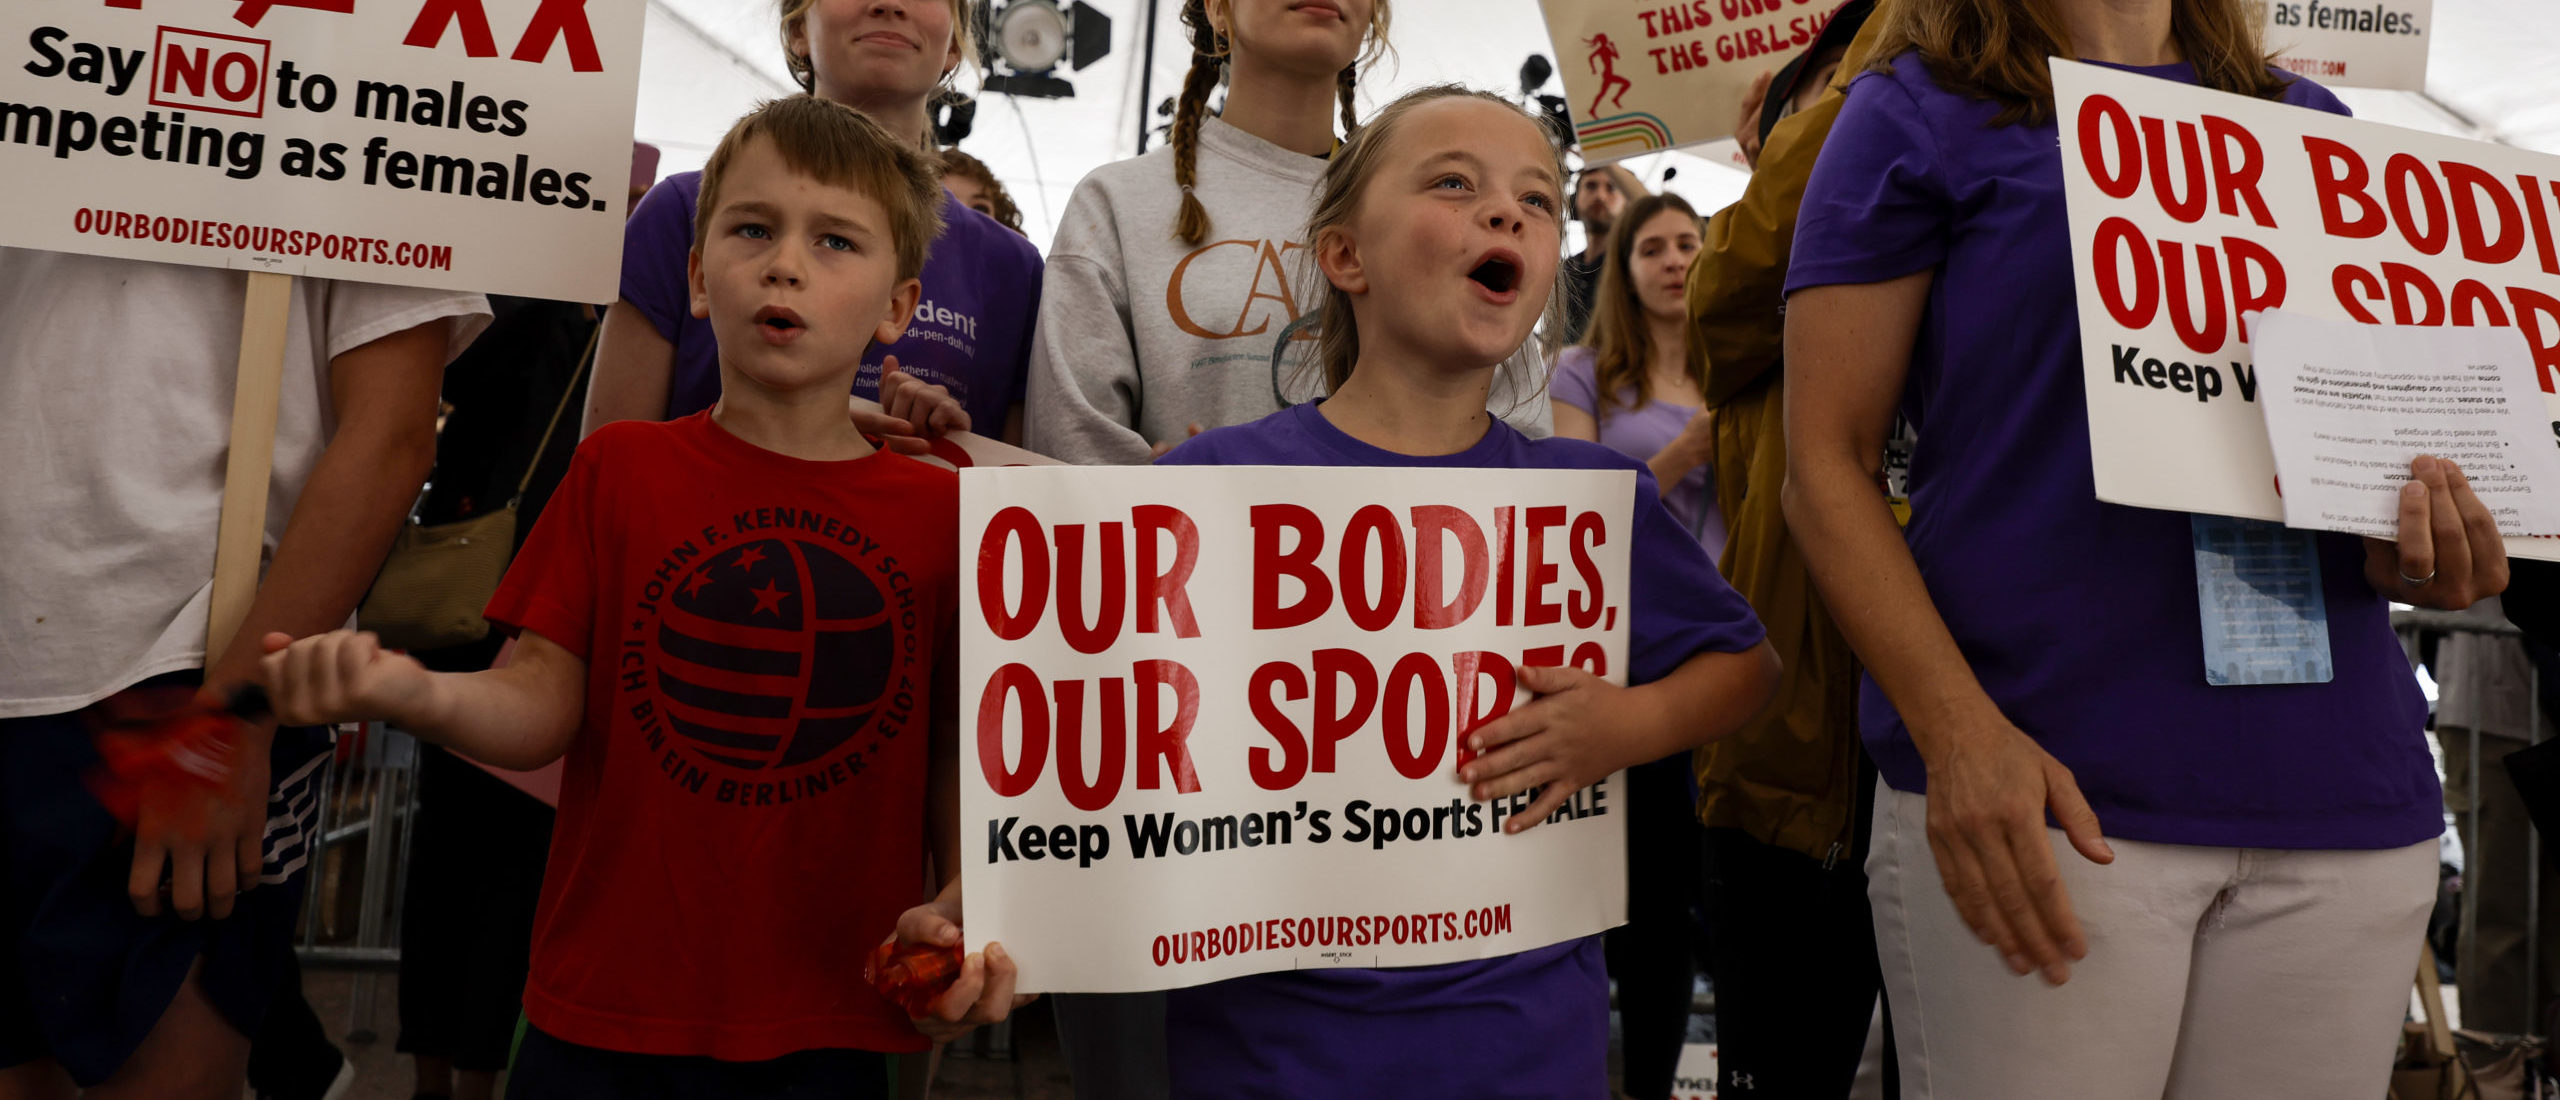 Demonstrators cheer during the speaking program at the "Our Bodies, Our Sports" rally for the 50th anniversary of Title IX at Freedom Plaza on June 23, 2022 in Washington, DC.